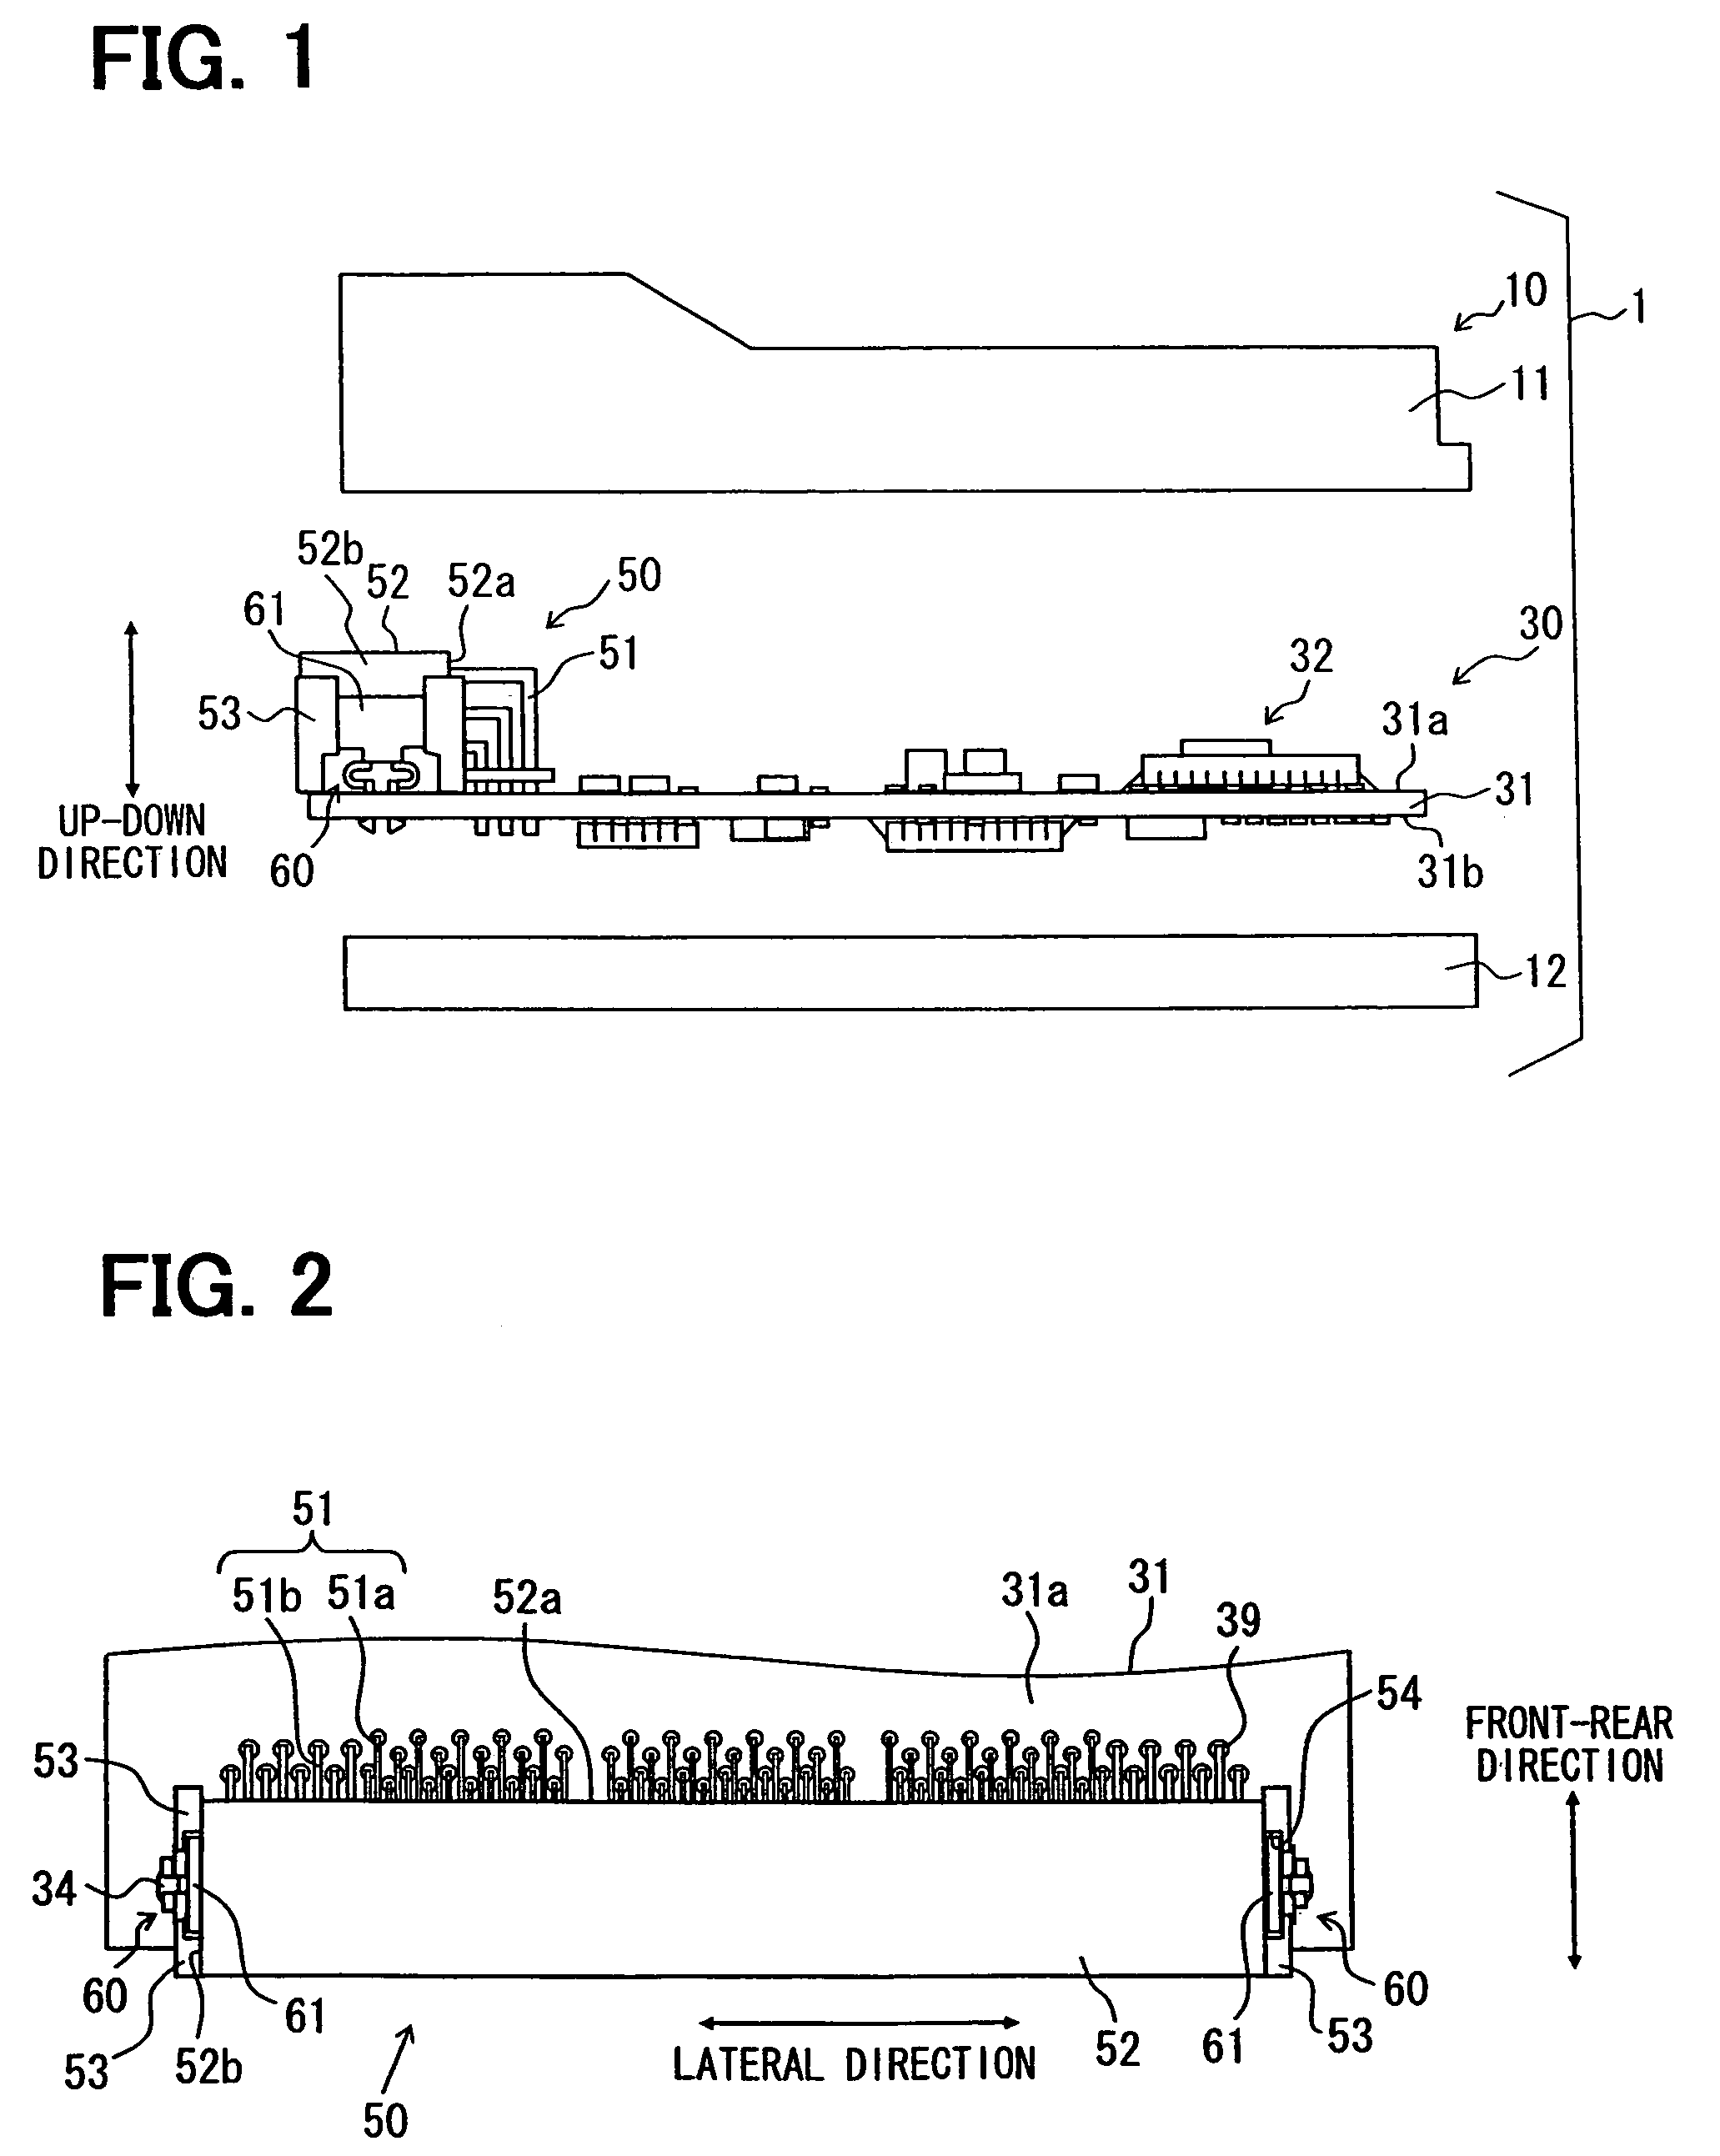 Retaining member electric component and electric device